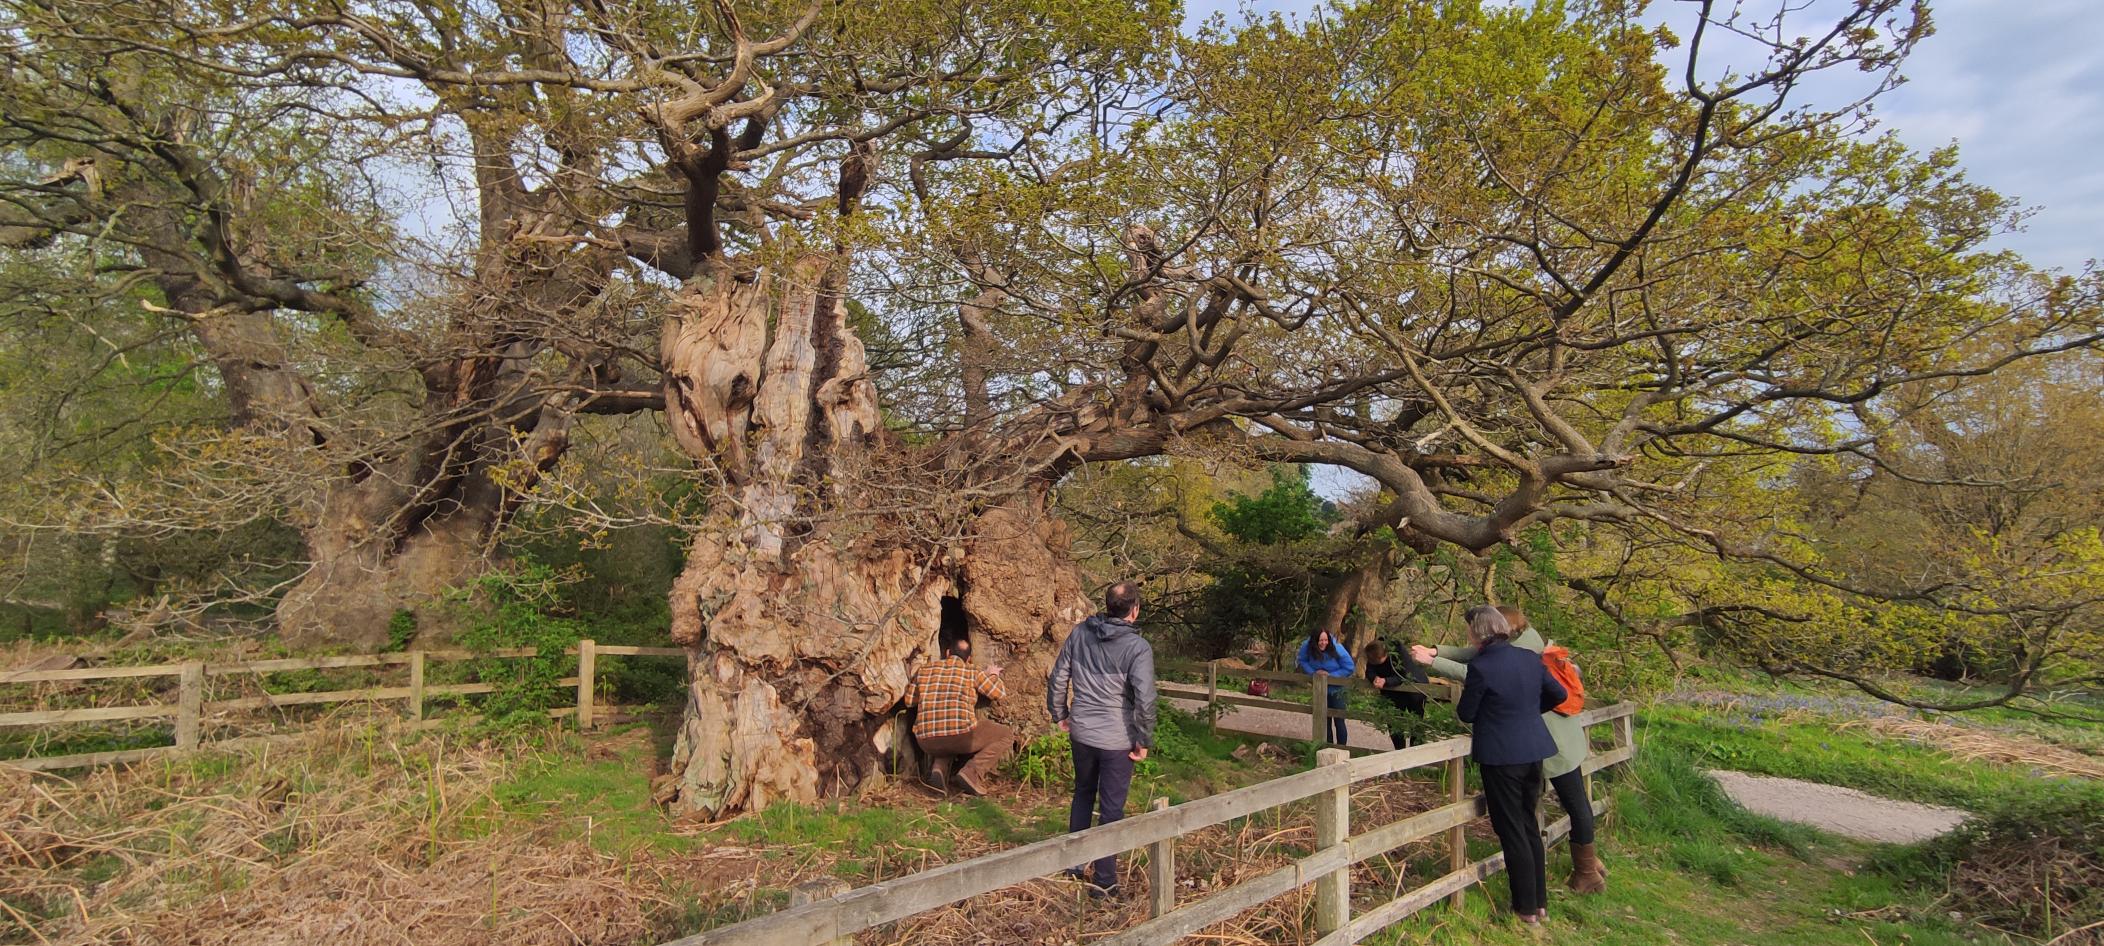 National Trust tree experts inspecting the Old Man of Calke